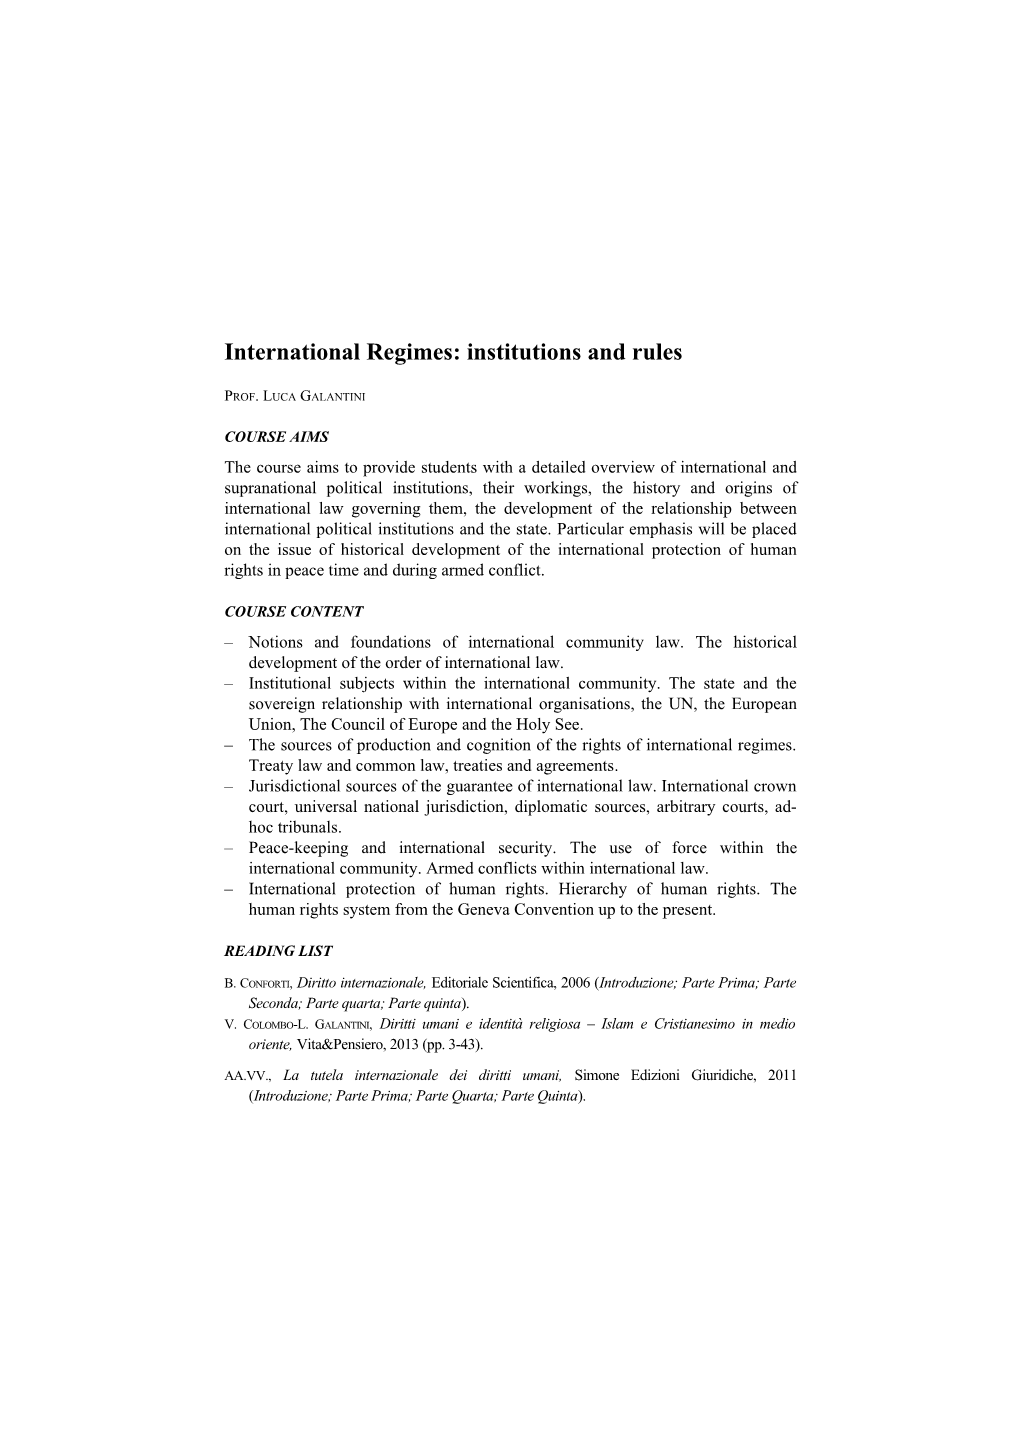 International Regimes: Institutions and Rules